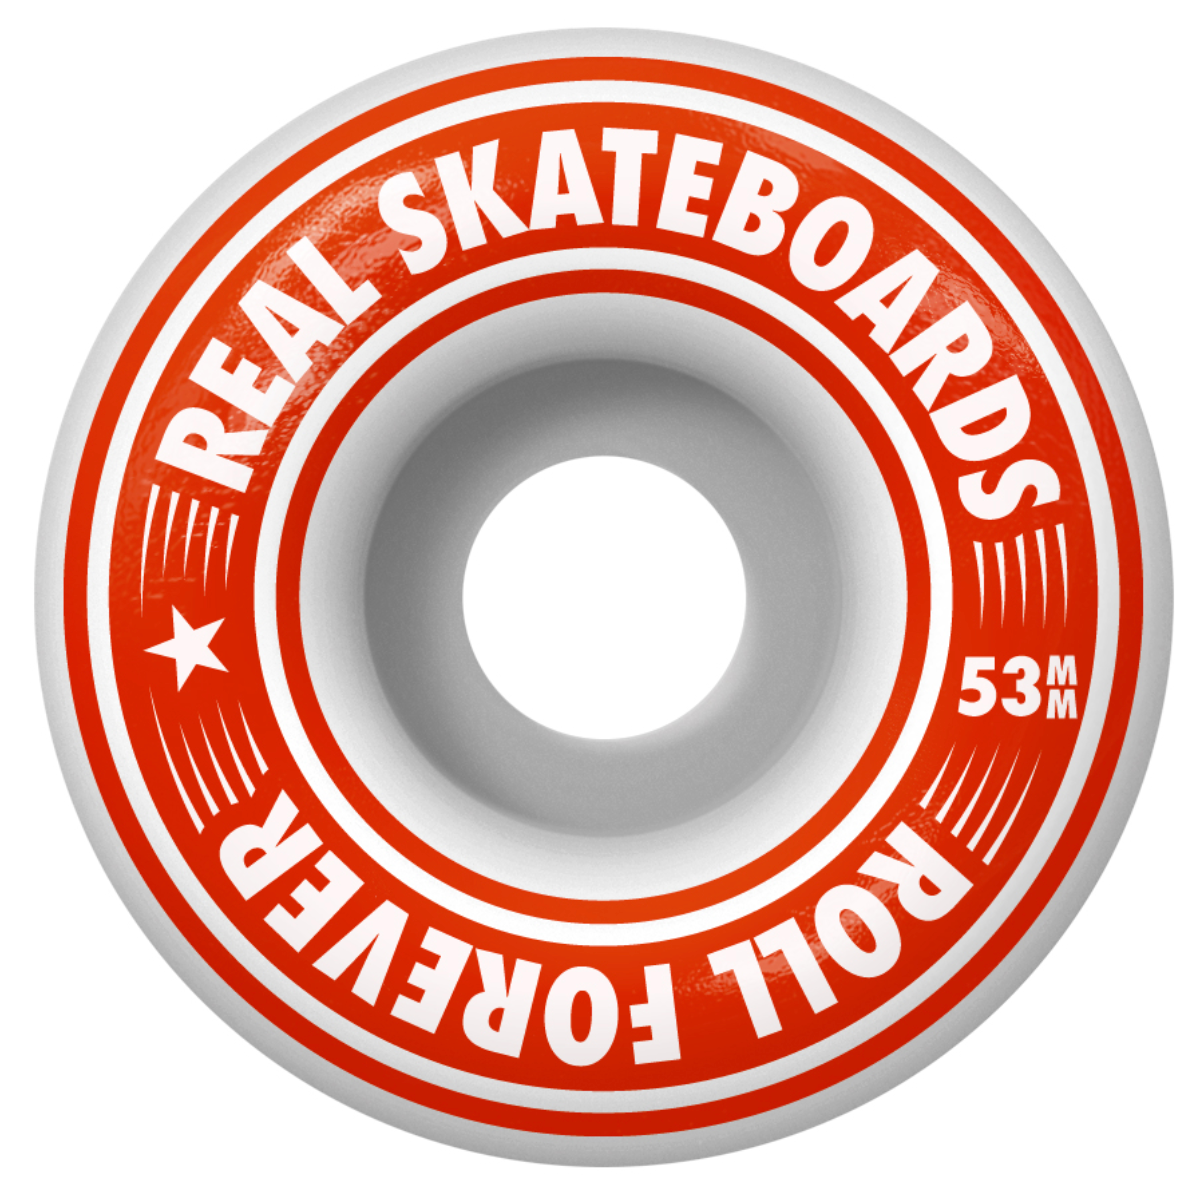 REAL COMPLETE - CLASSIC OVAL RED MINI (7.3") - The Drive Skateshop